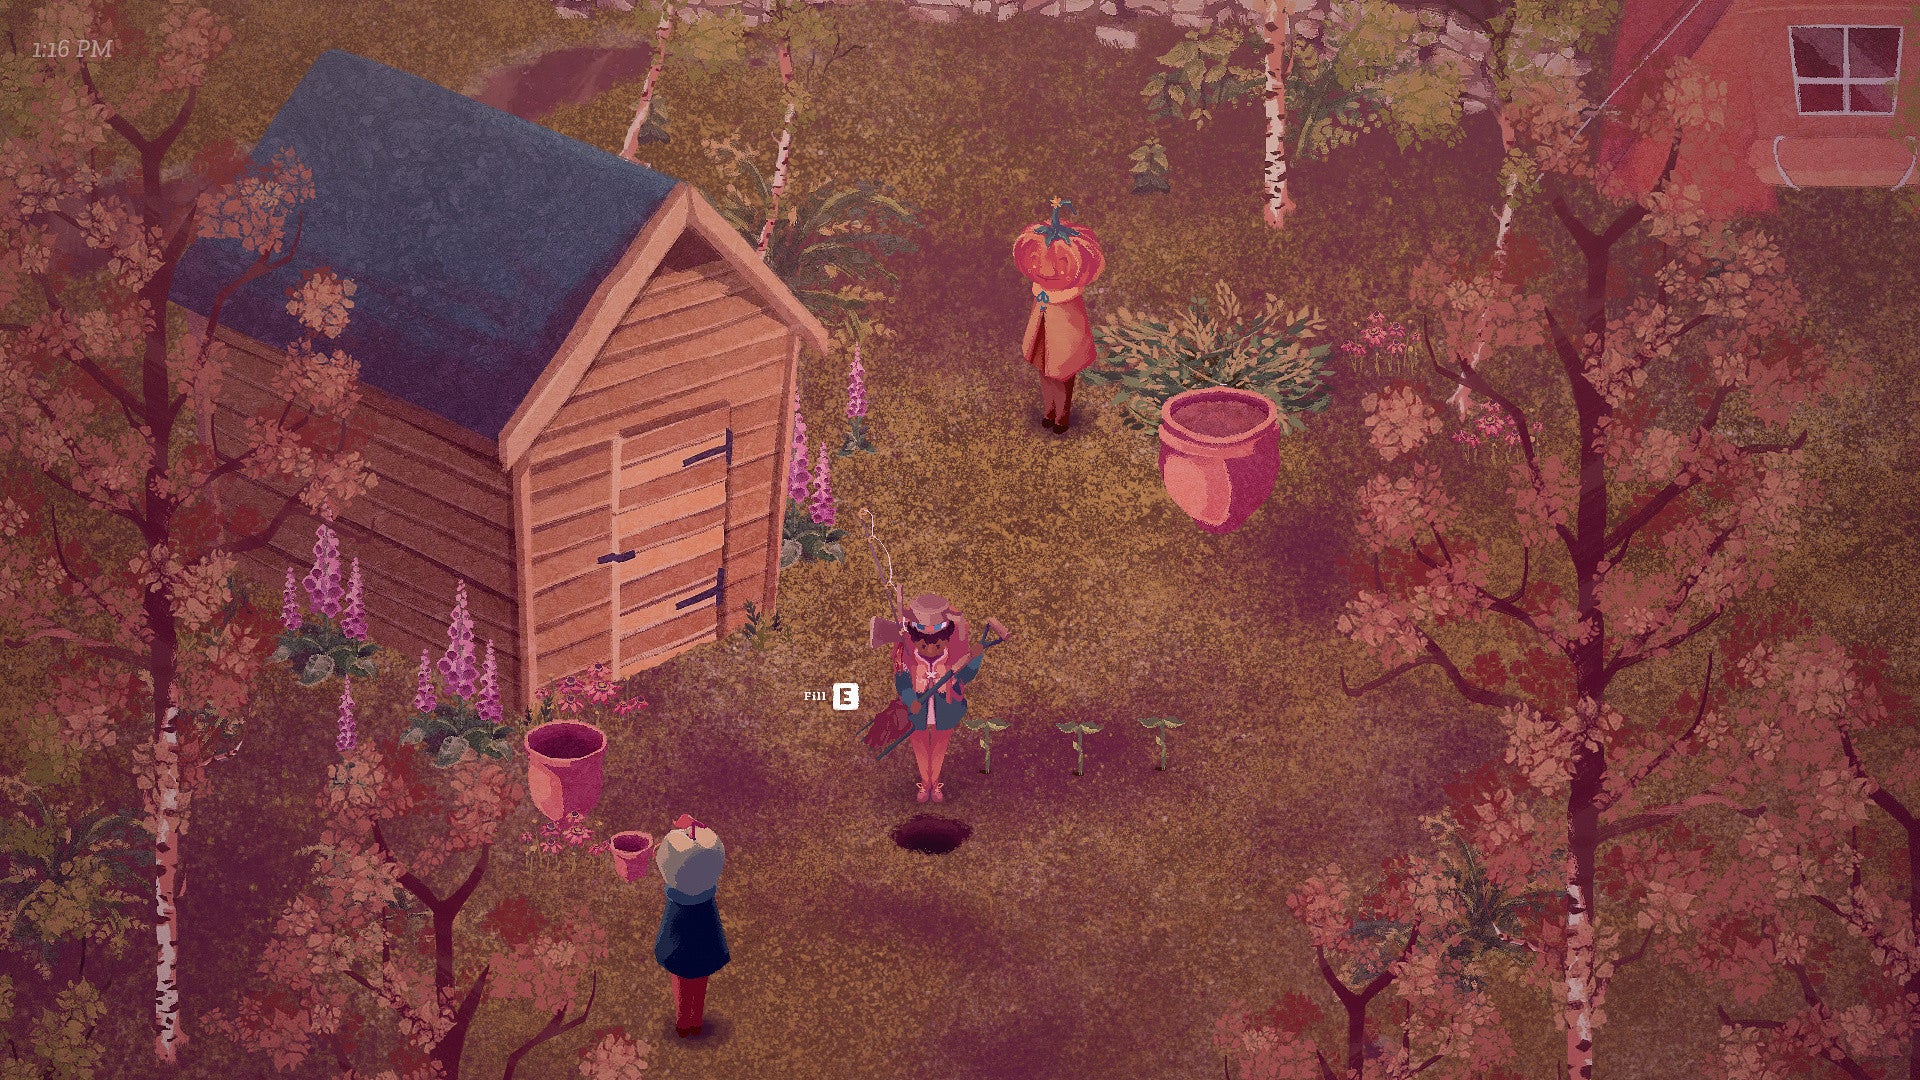 The Garden Path - A player stands beside a cabin with a shovel in hand to plant some crops. A pumpkin-headed villager stands nearby.